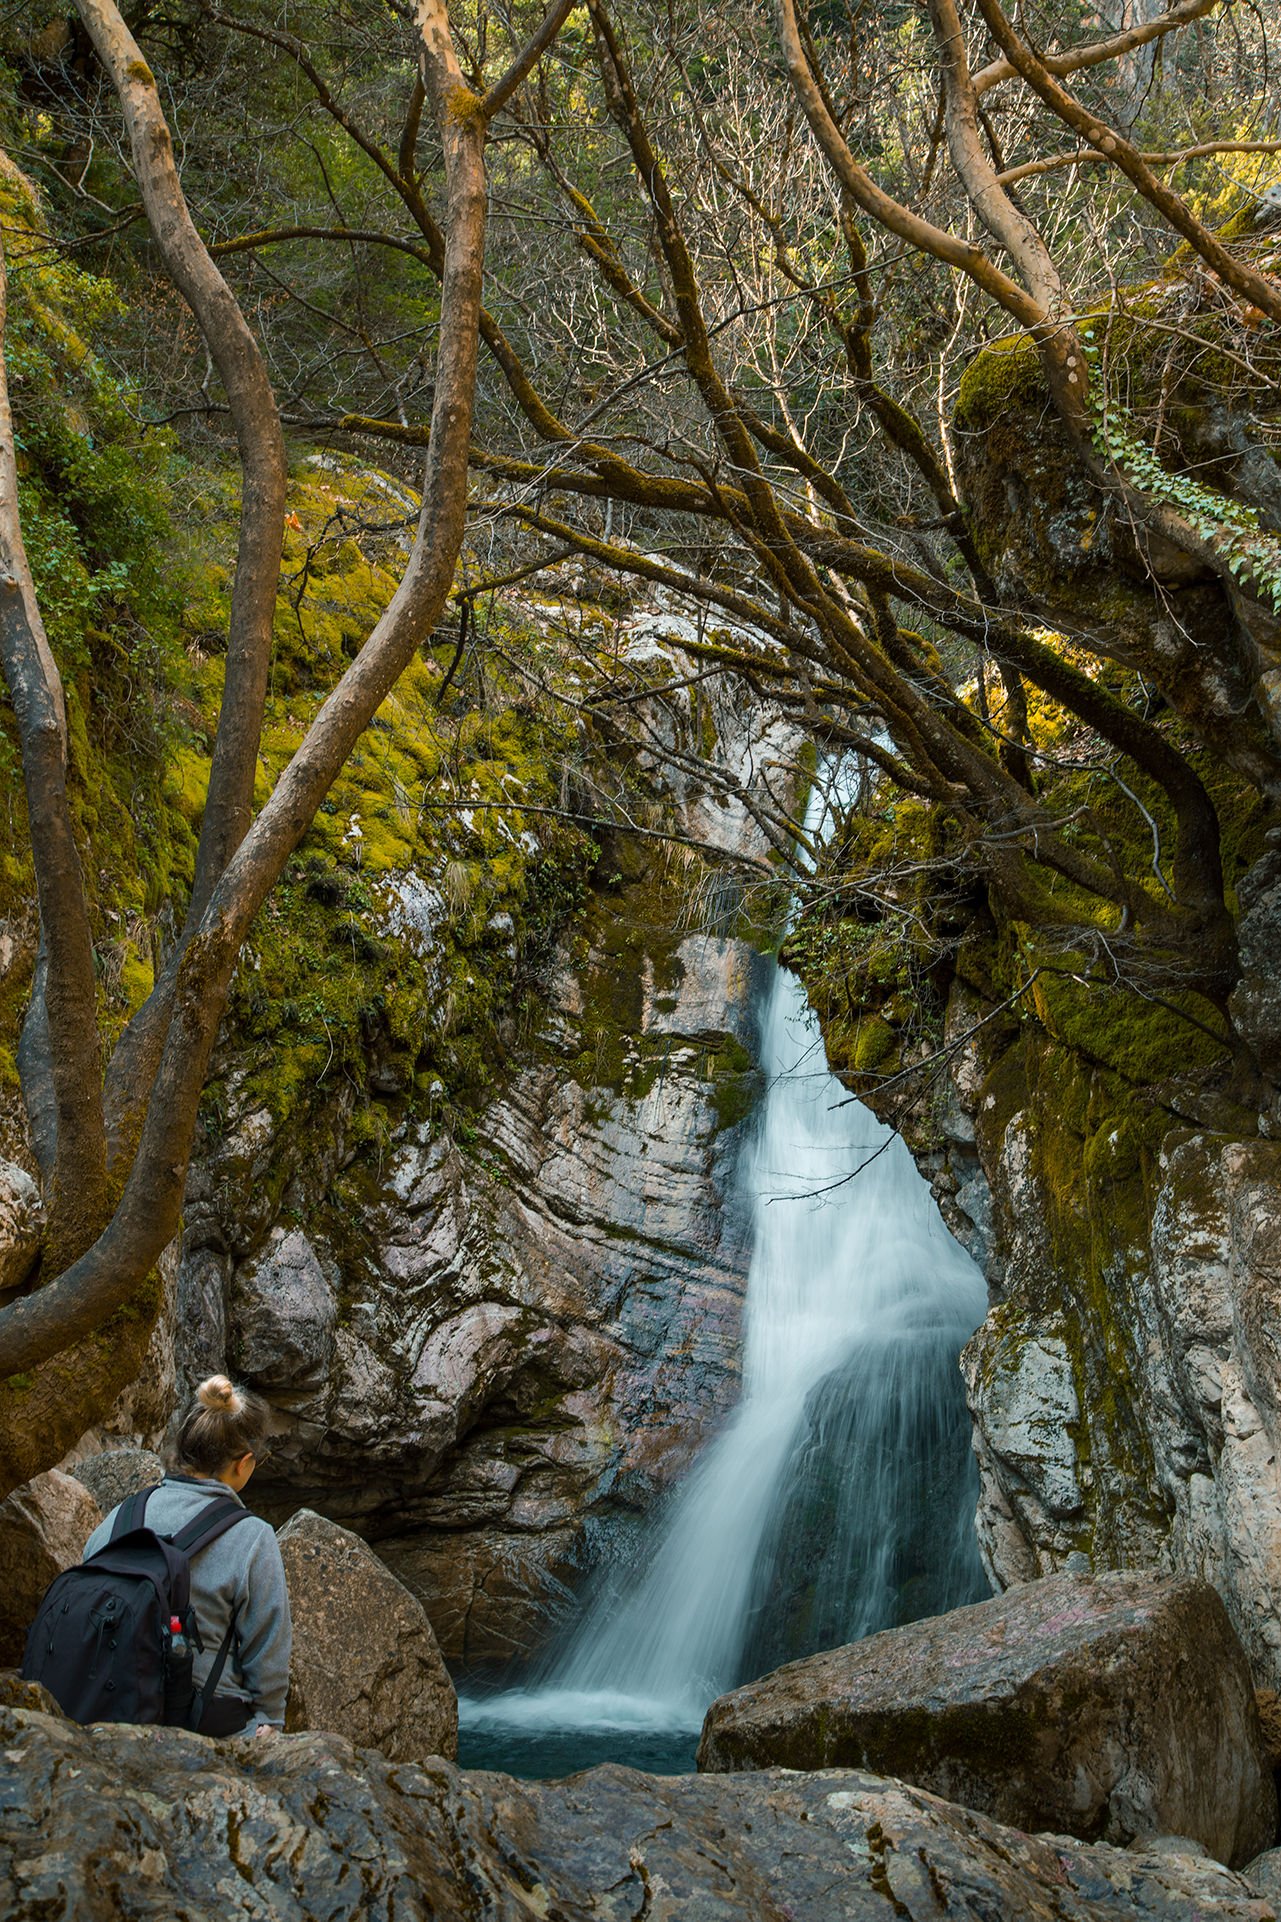 The call of nature in this mountainous region of Central Greece is as irresistible as the flow of its streams and rivers